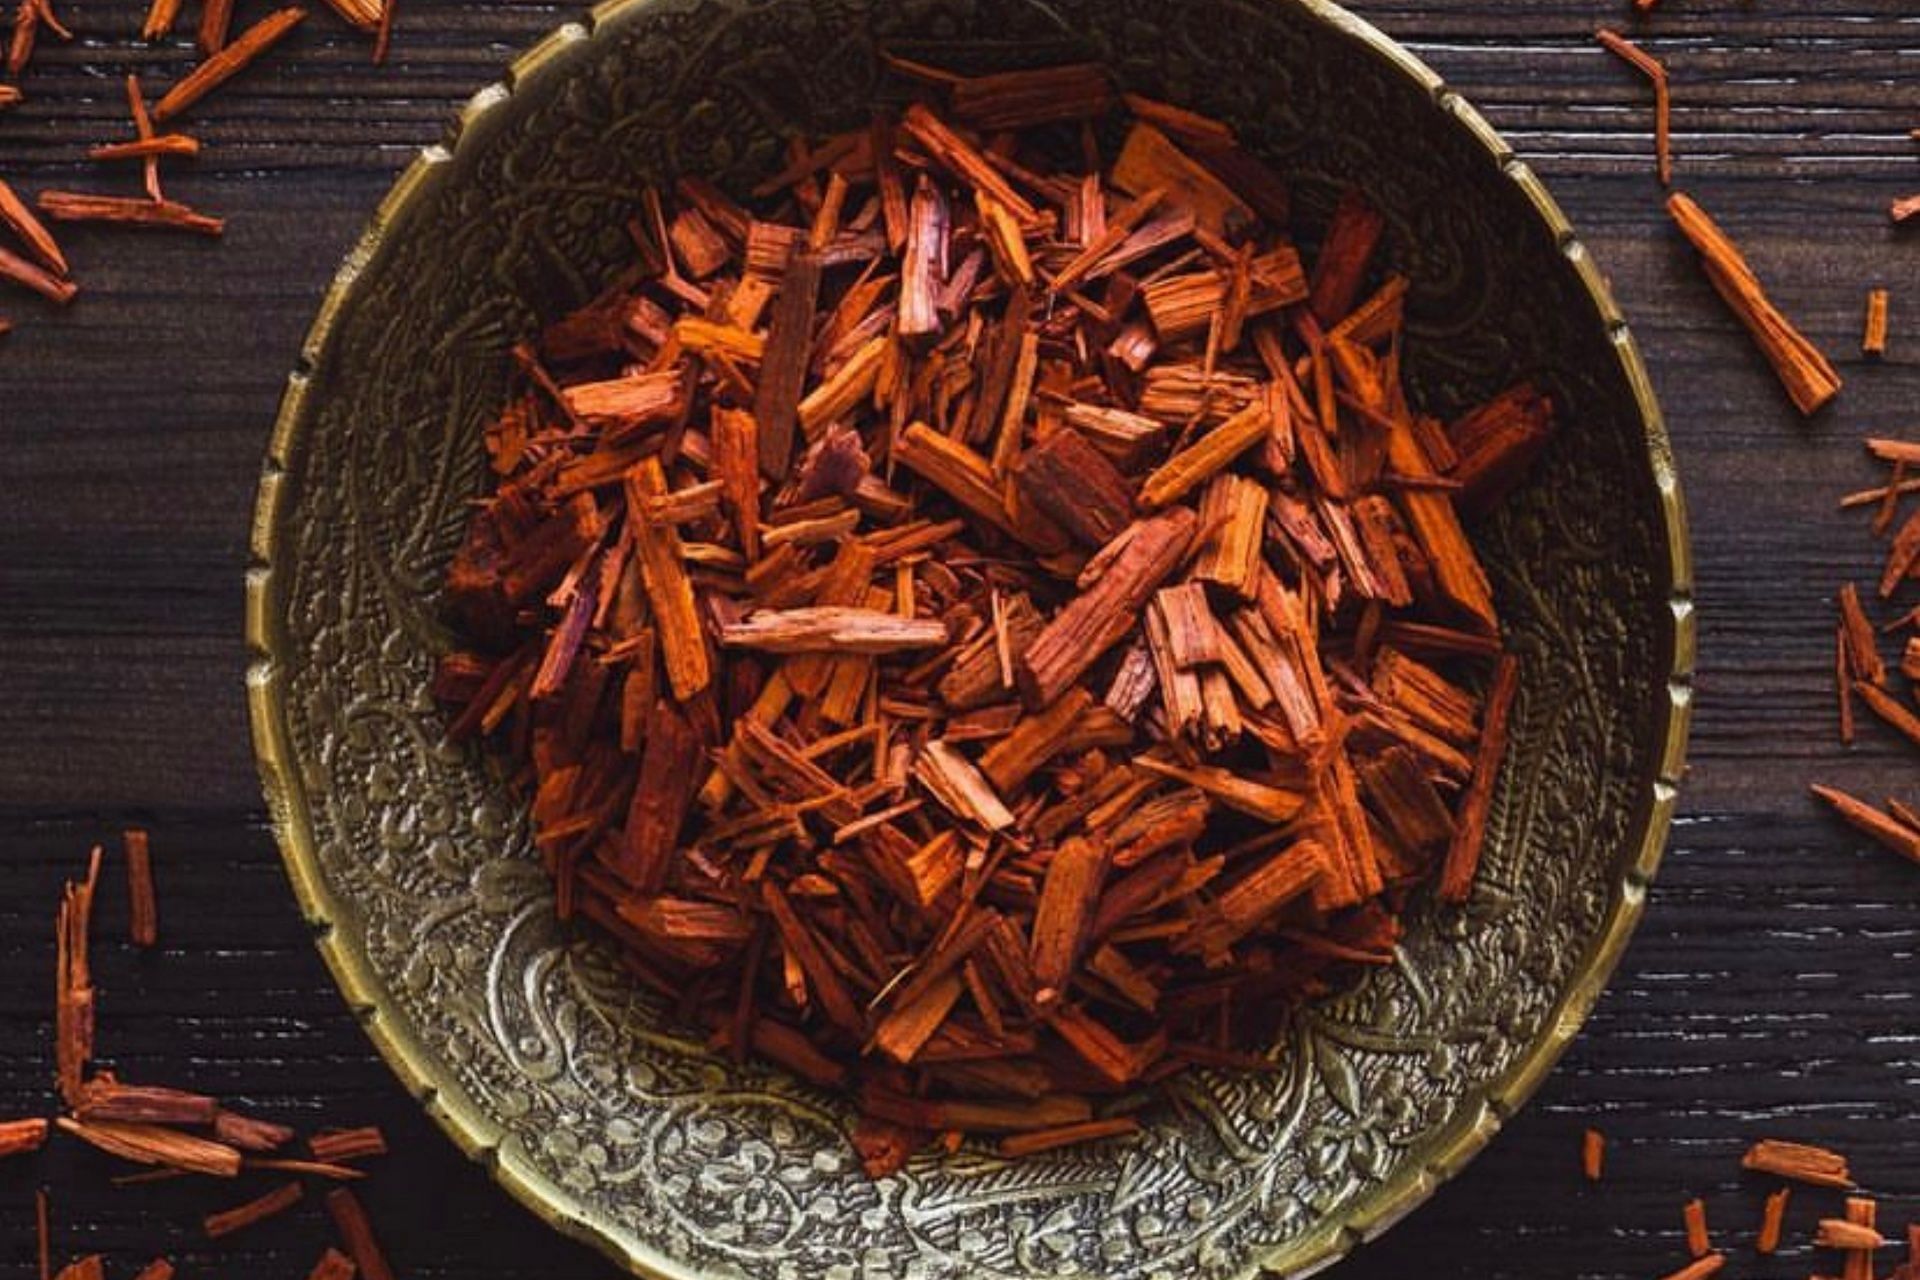 Sandalwood oil: 7 amazing benefits and how to use it at home